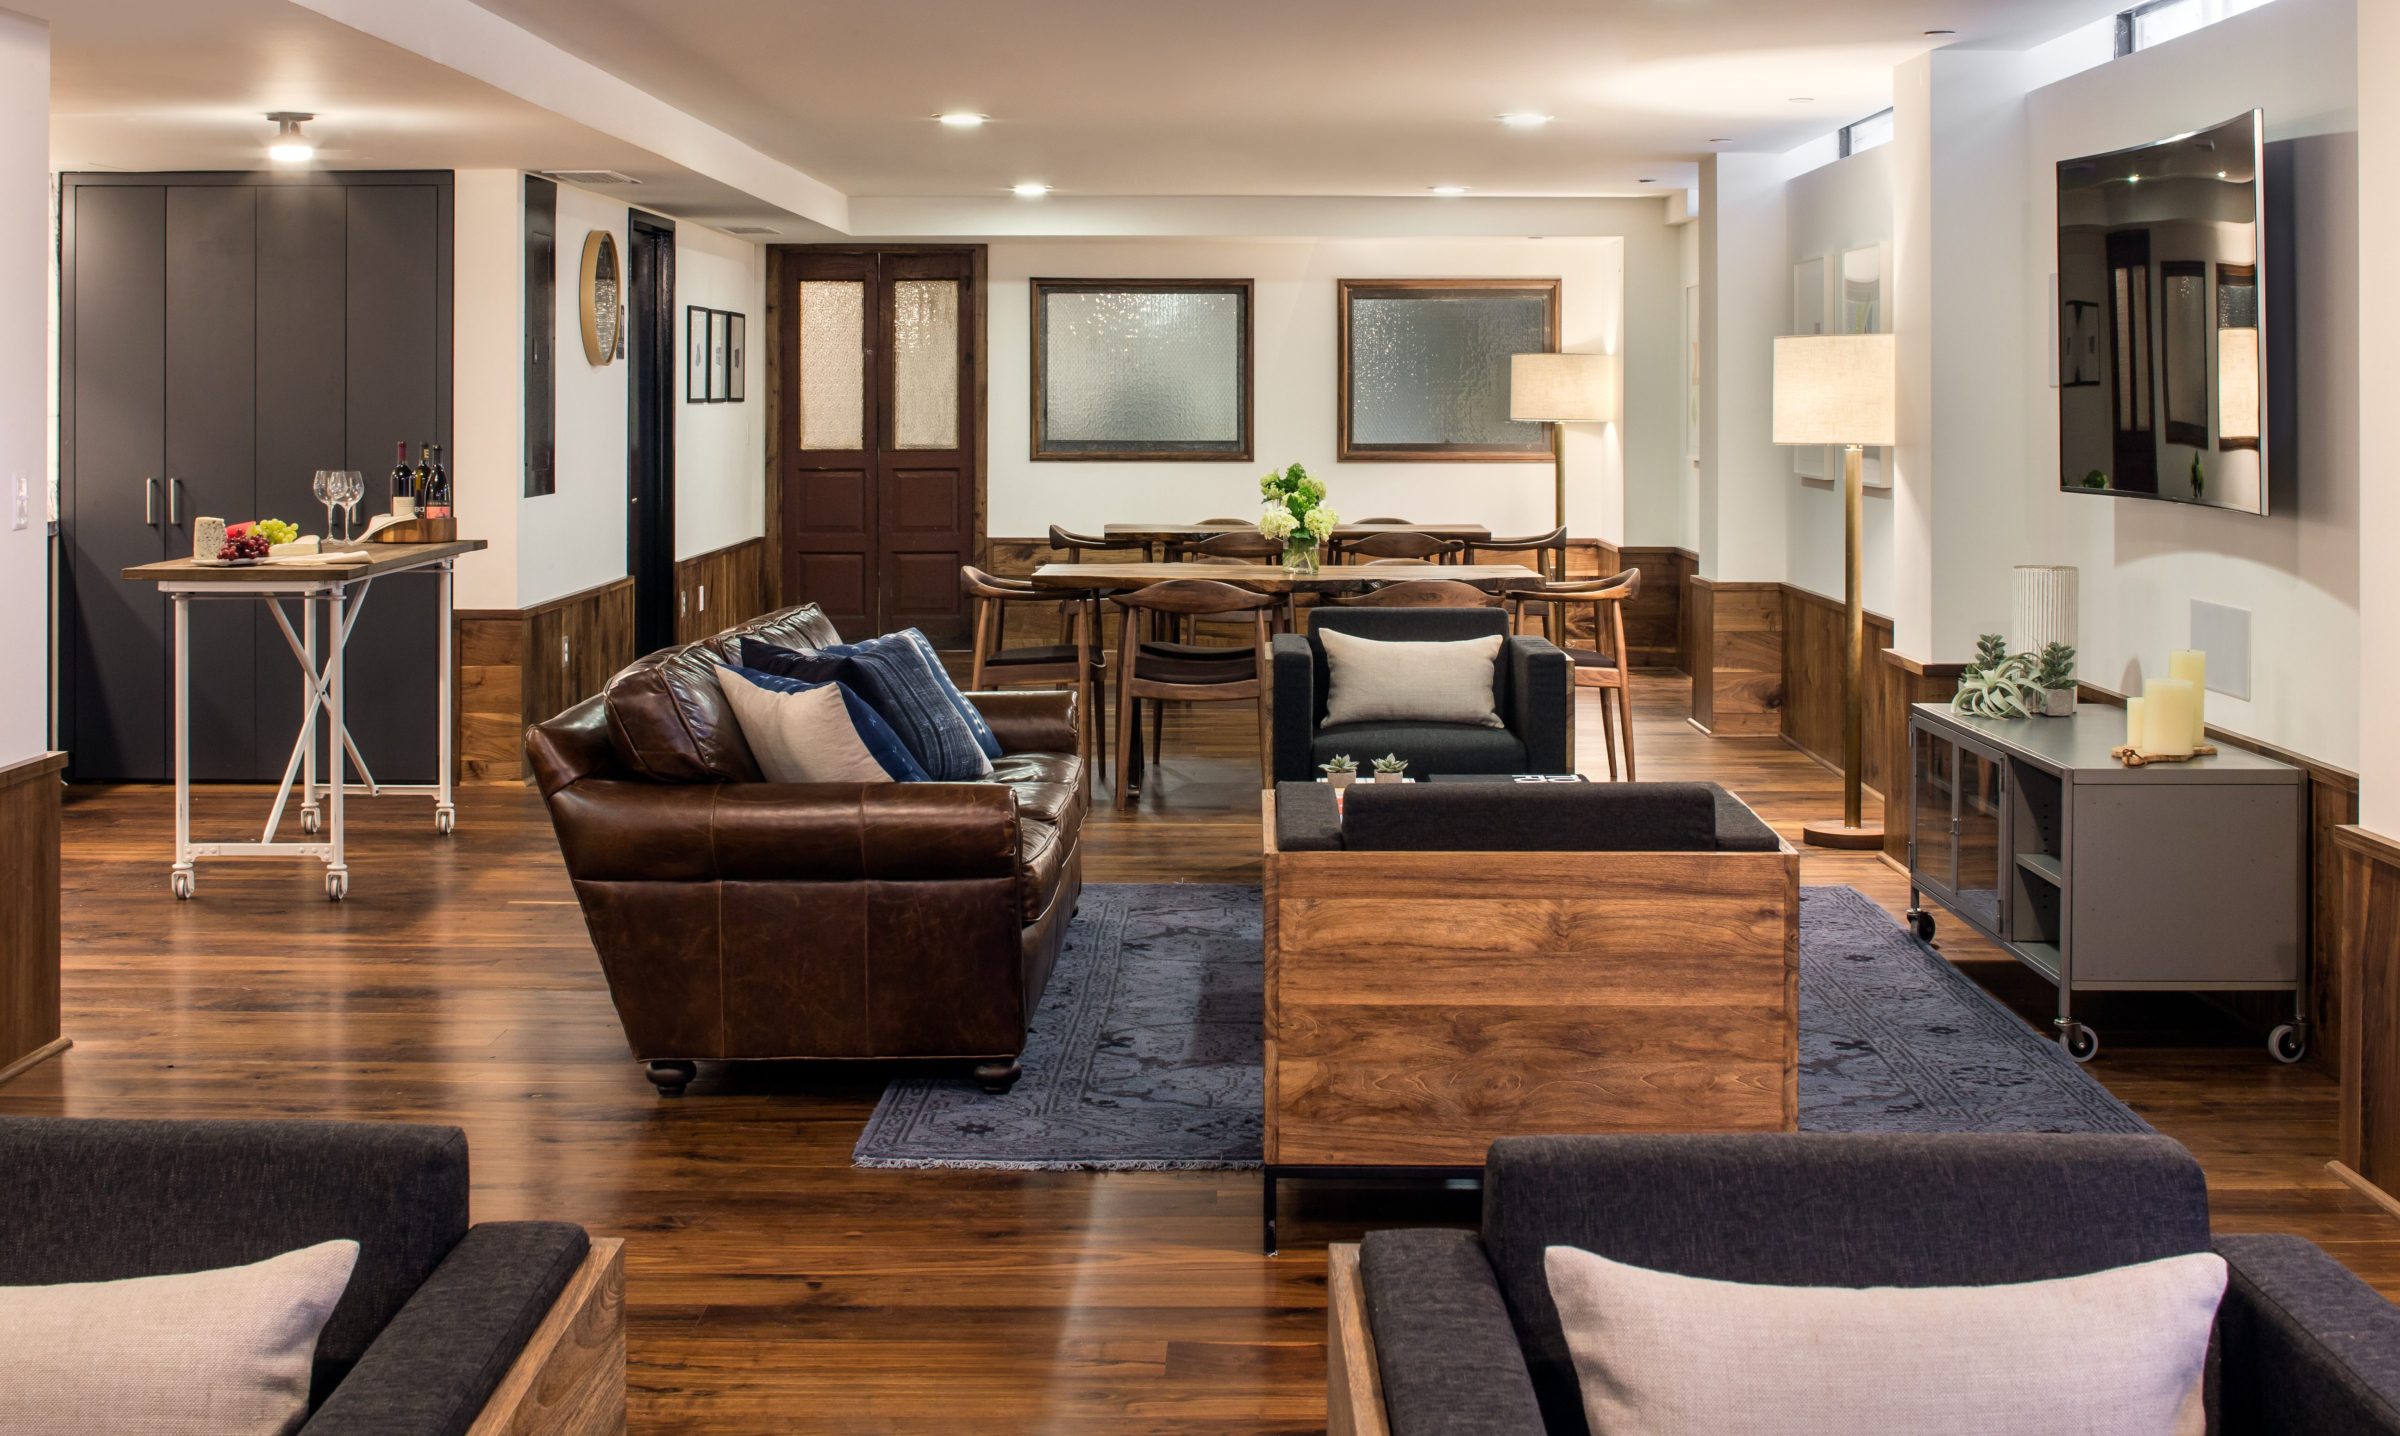 REsident lounge with comfortable, stylish seating